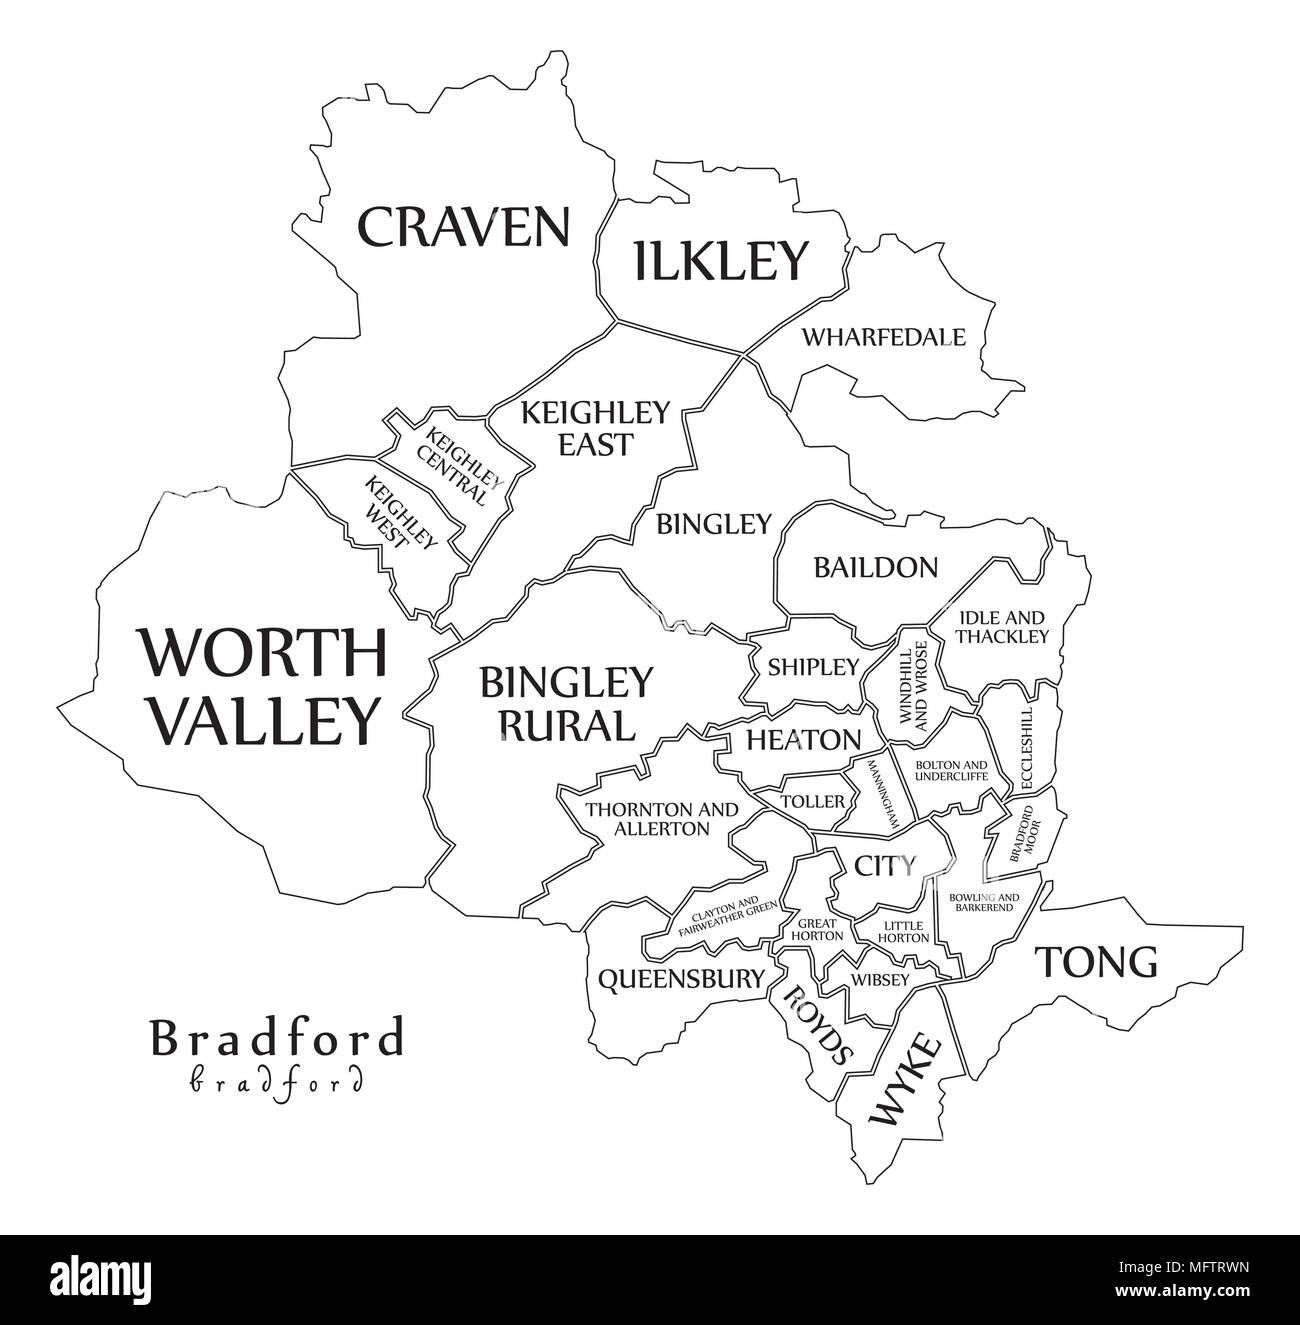 Modern City Map Bradford City Of England With Wards And Titles